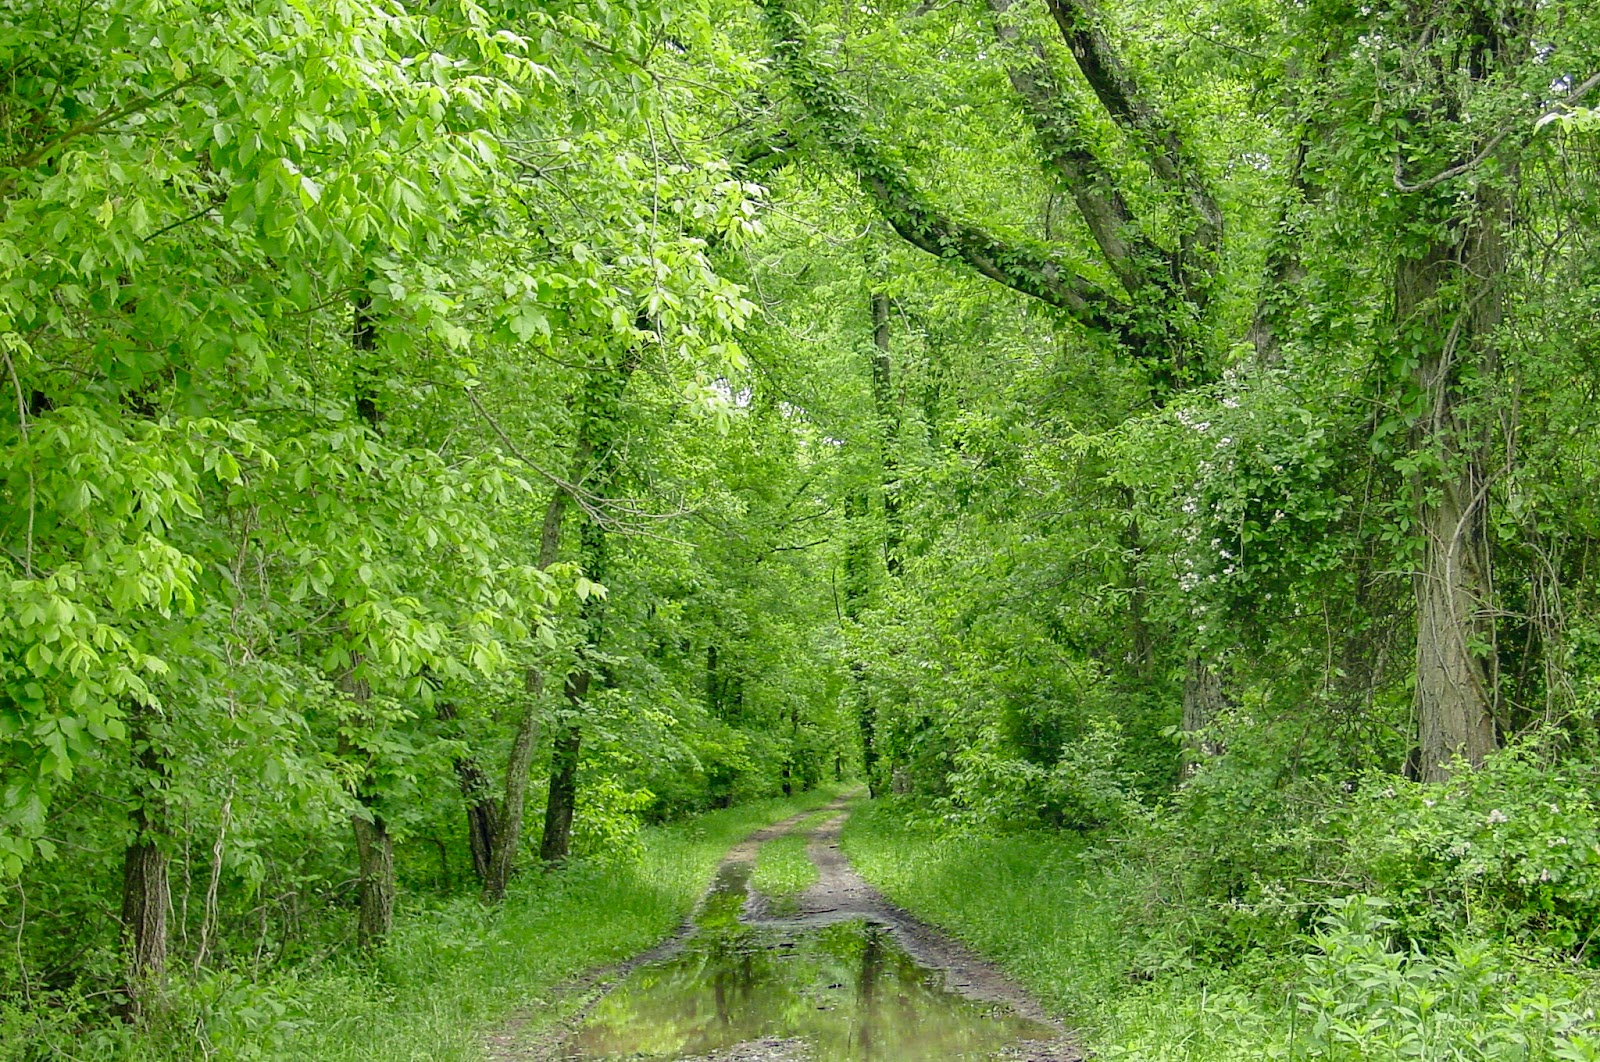 A double track road disappears into a thick green wood with a water puddle in the foreground reflecting the trees. 